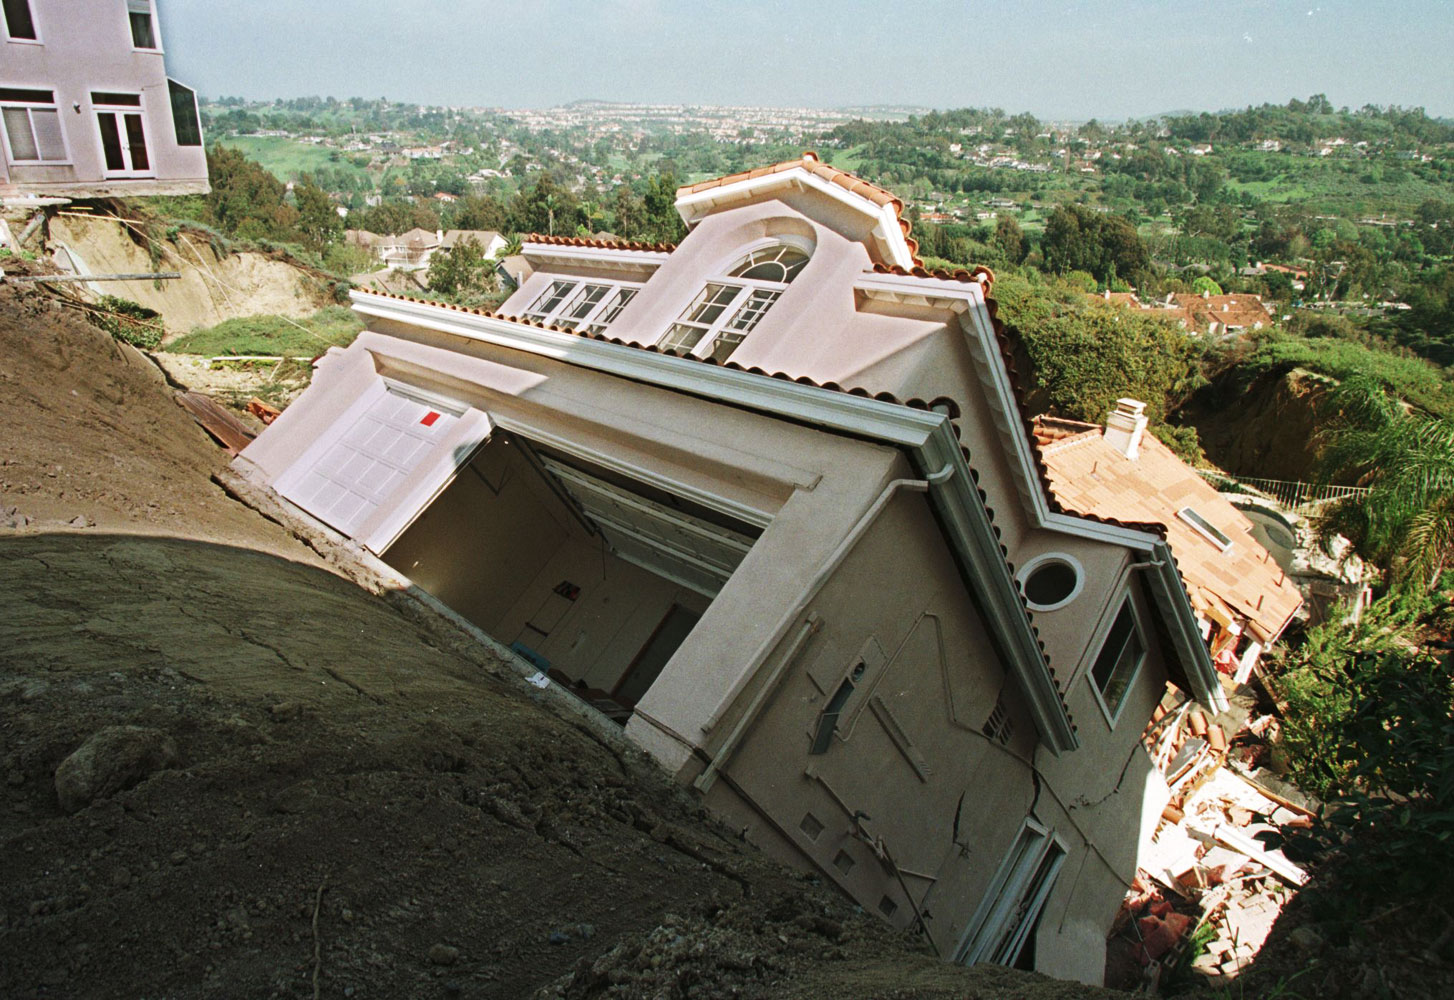 A luxury home in Laguna Niguel Calif. slips down a hillside eroded on March 19, 1998 by heavy El Nino generated rains. Two homes and seven condominiums have been destroyed in the slide and several more were threatened with destruction.